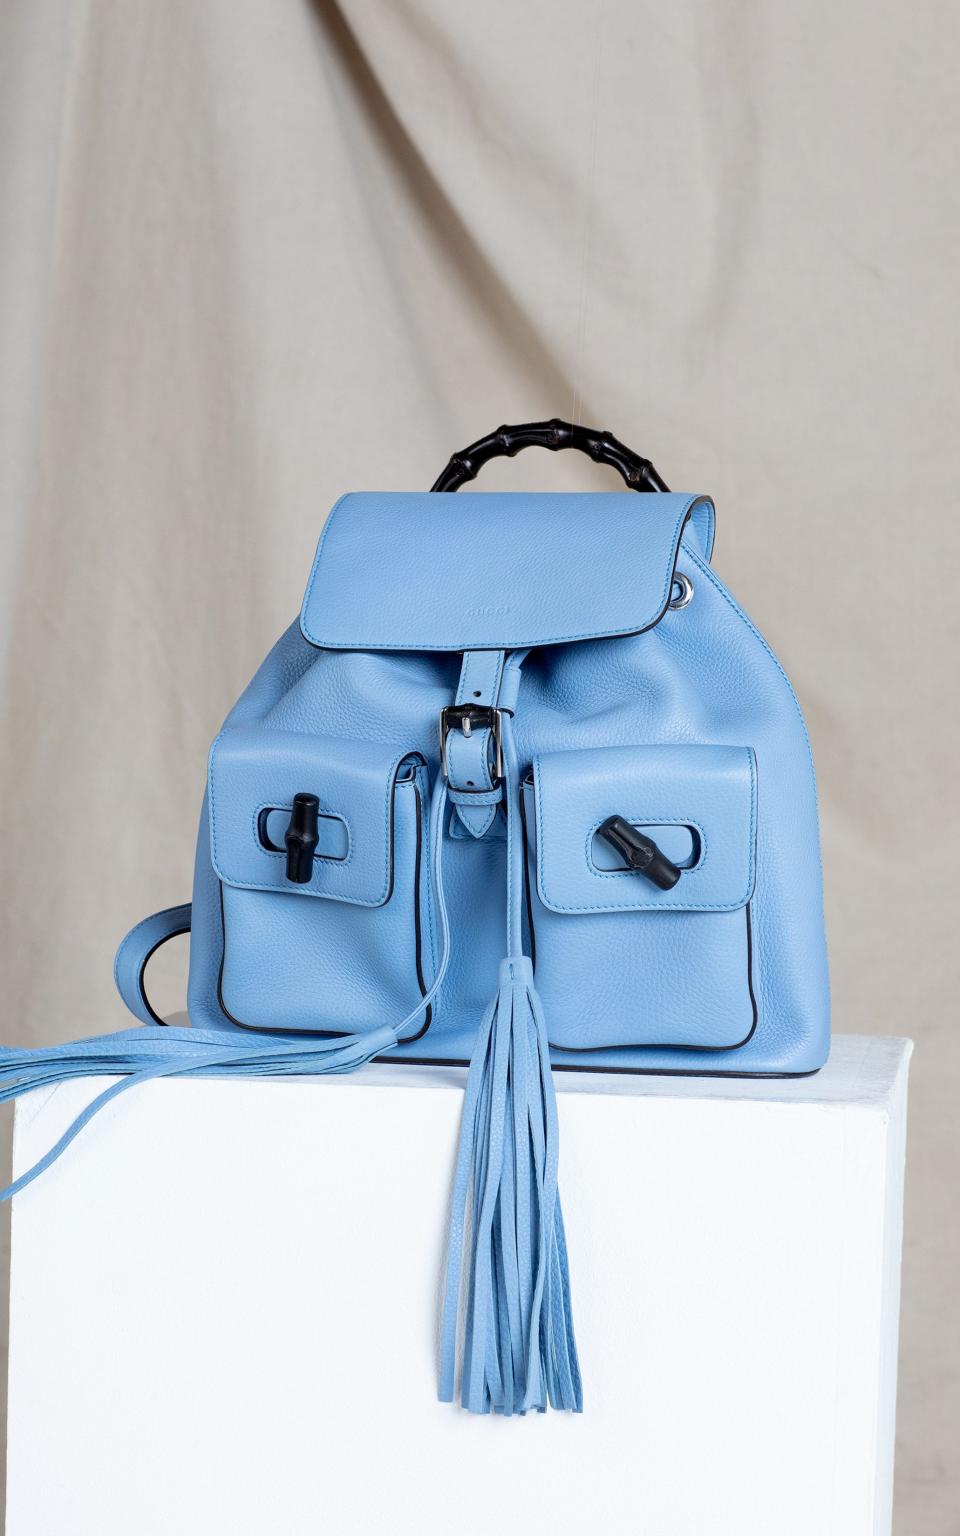 gucci backpack - Photography: Kevin Davies / Styling: Sophie Warburton / Photographic Direction: Krishna Sheth